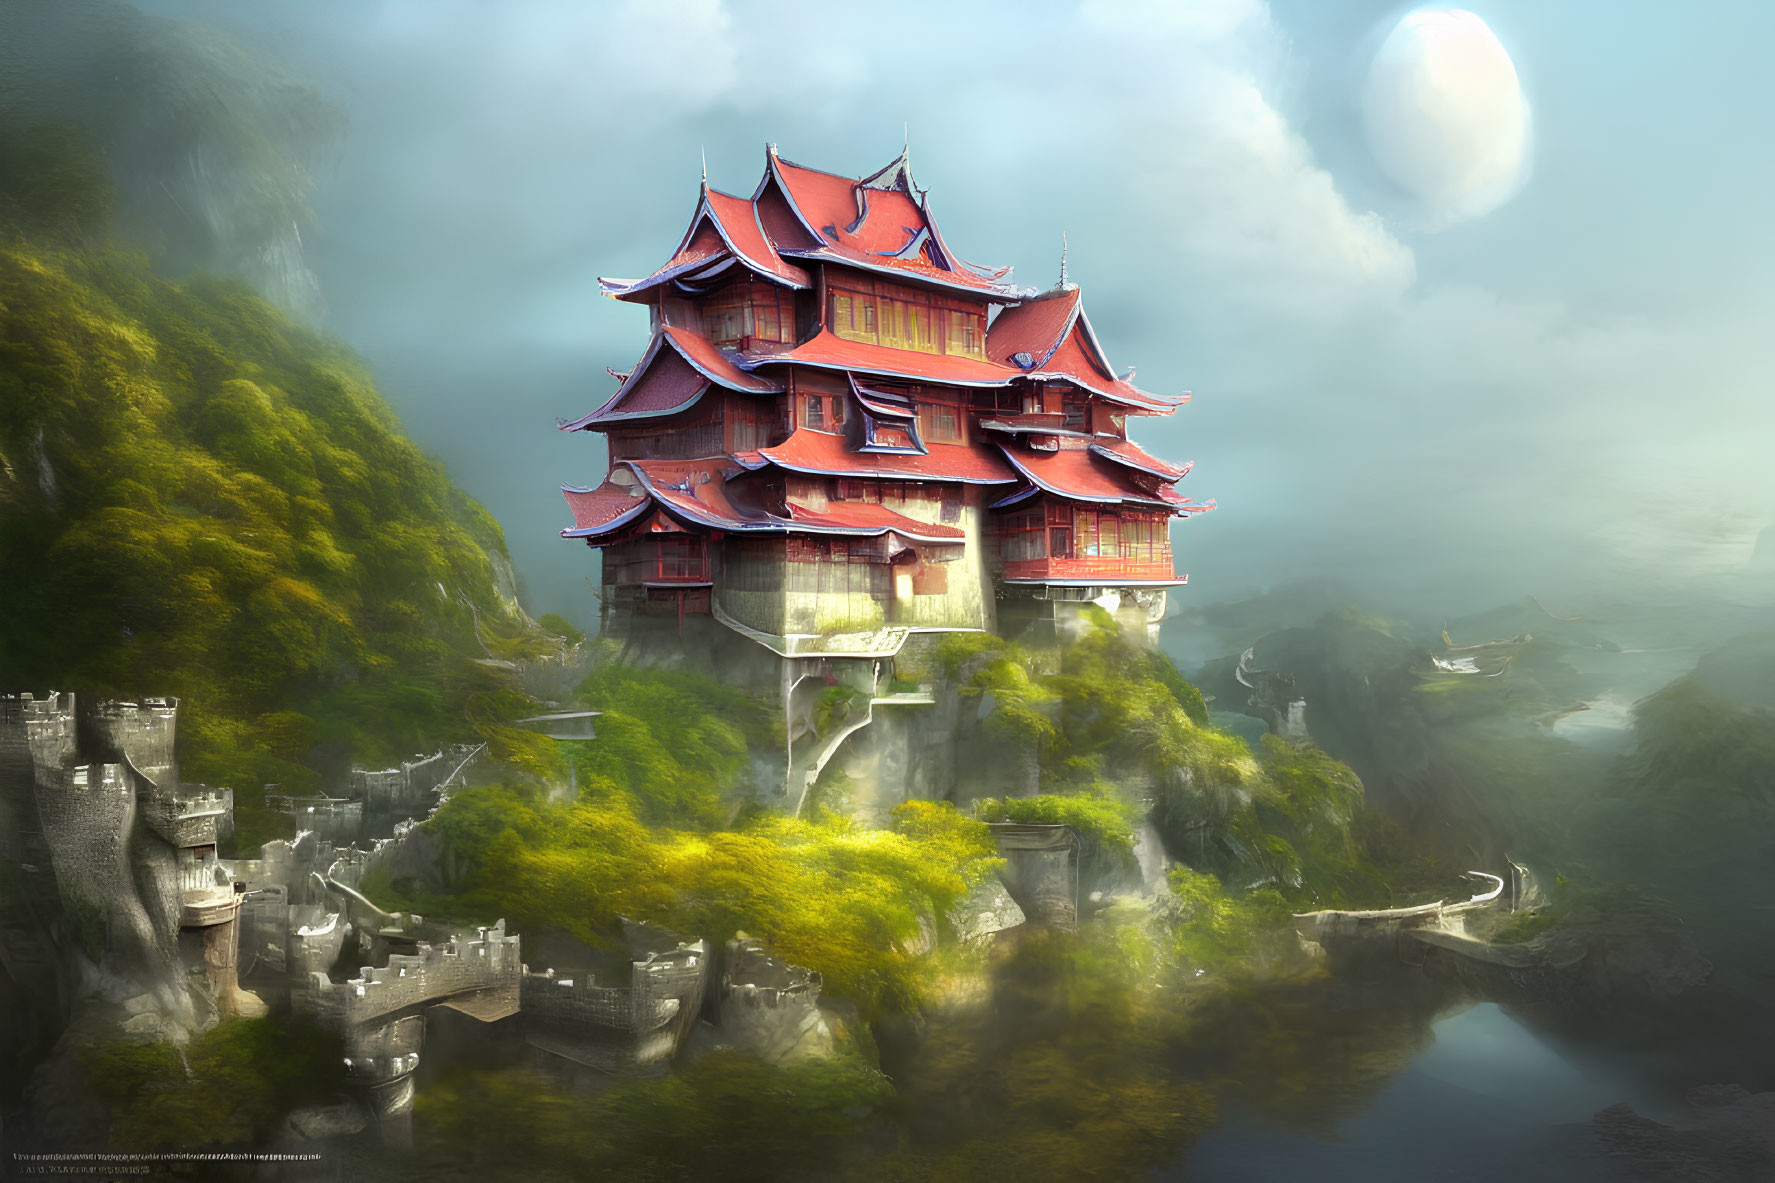 Red Pagoda on Cliff Amid Lush Greenery and Ruins with Moonlit Fog